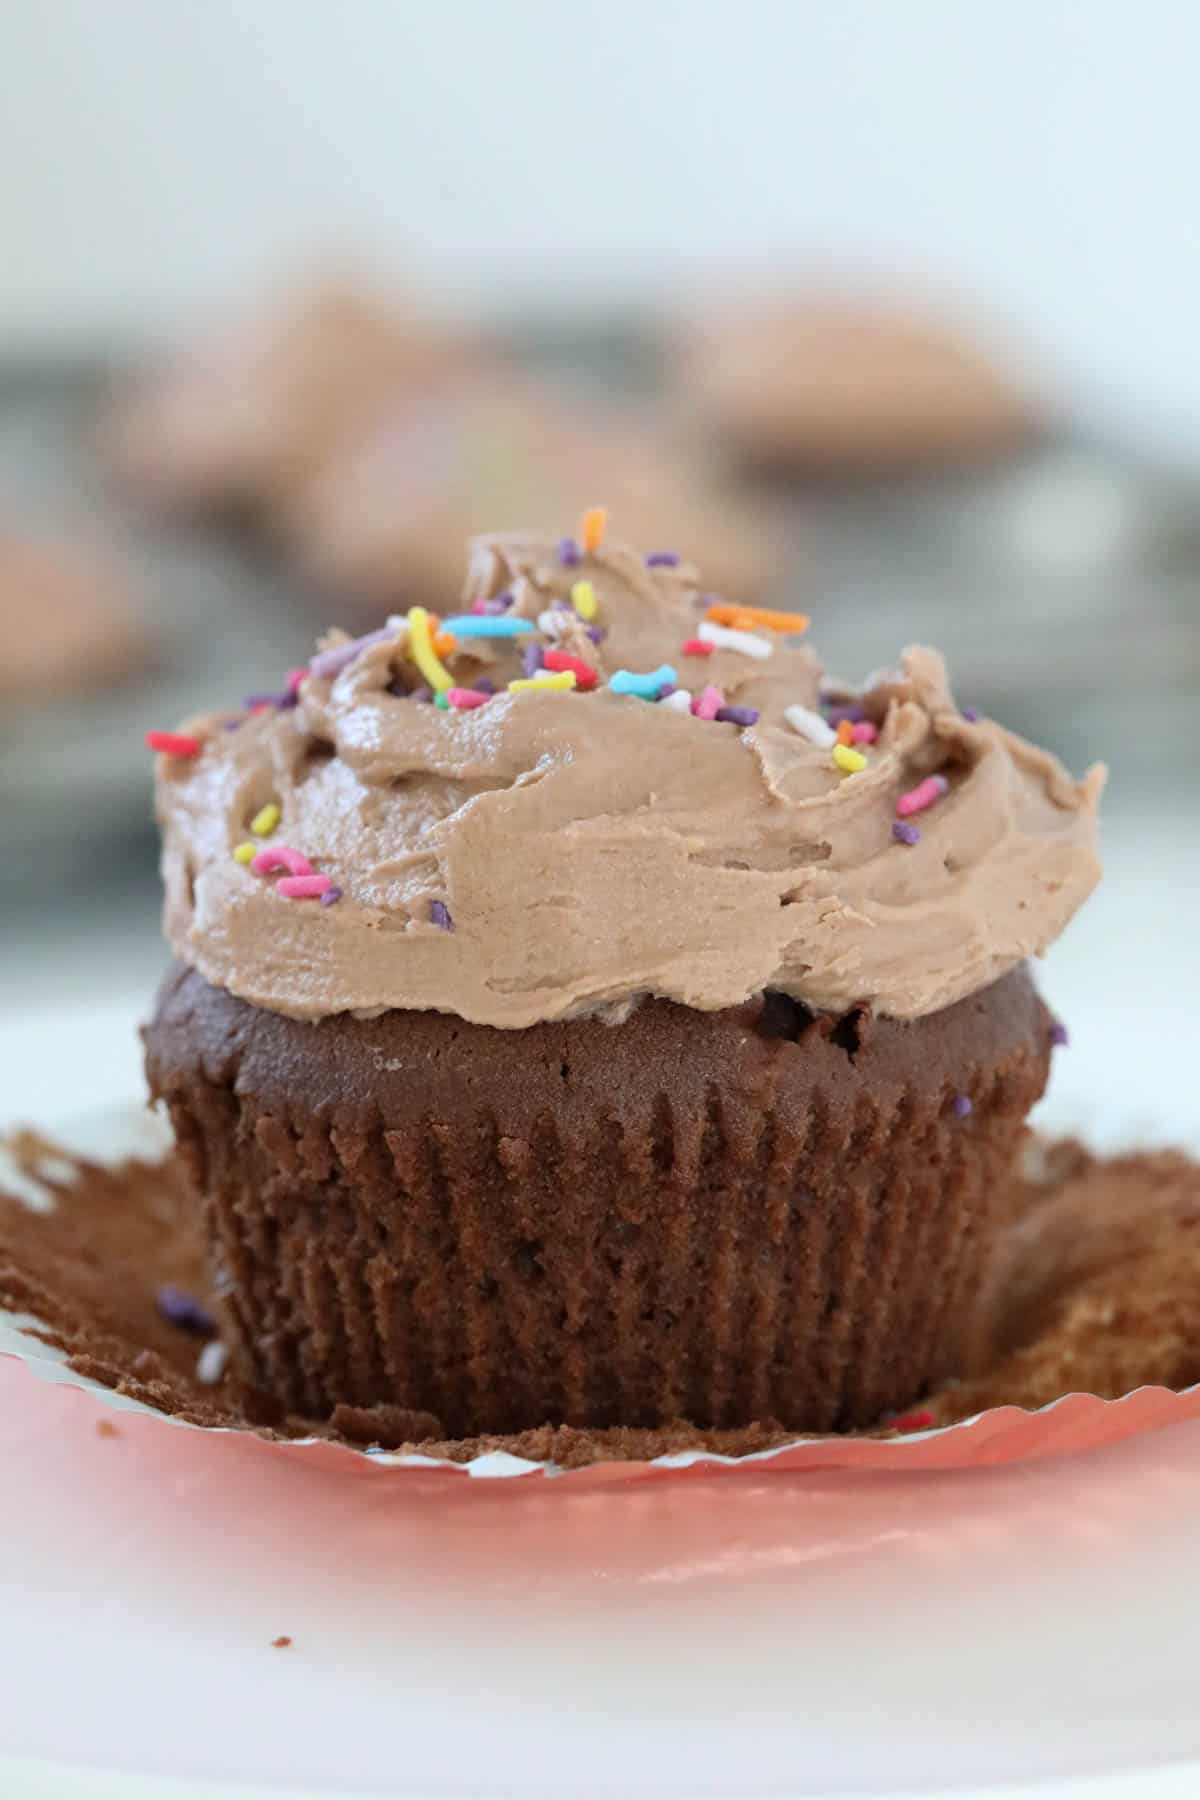 Frosting and sprinkles on top of a cupcake.